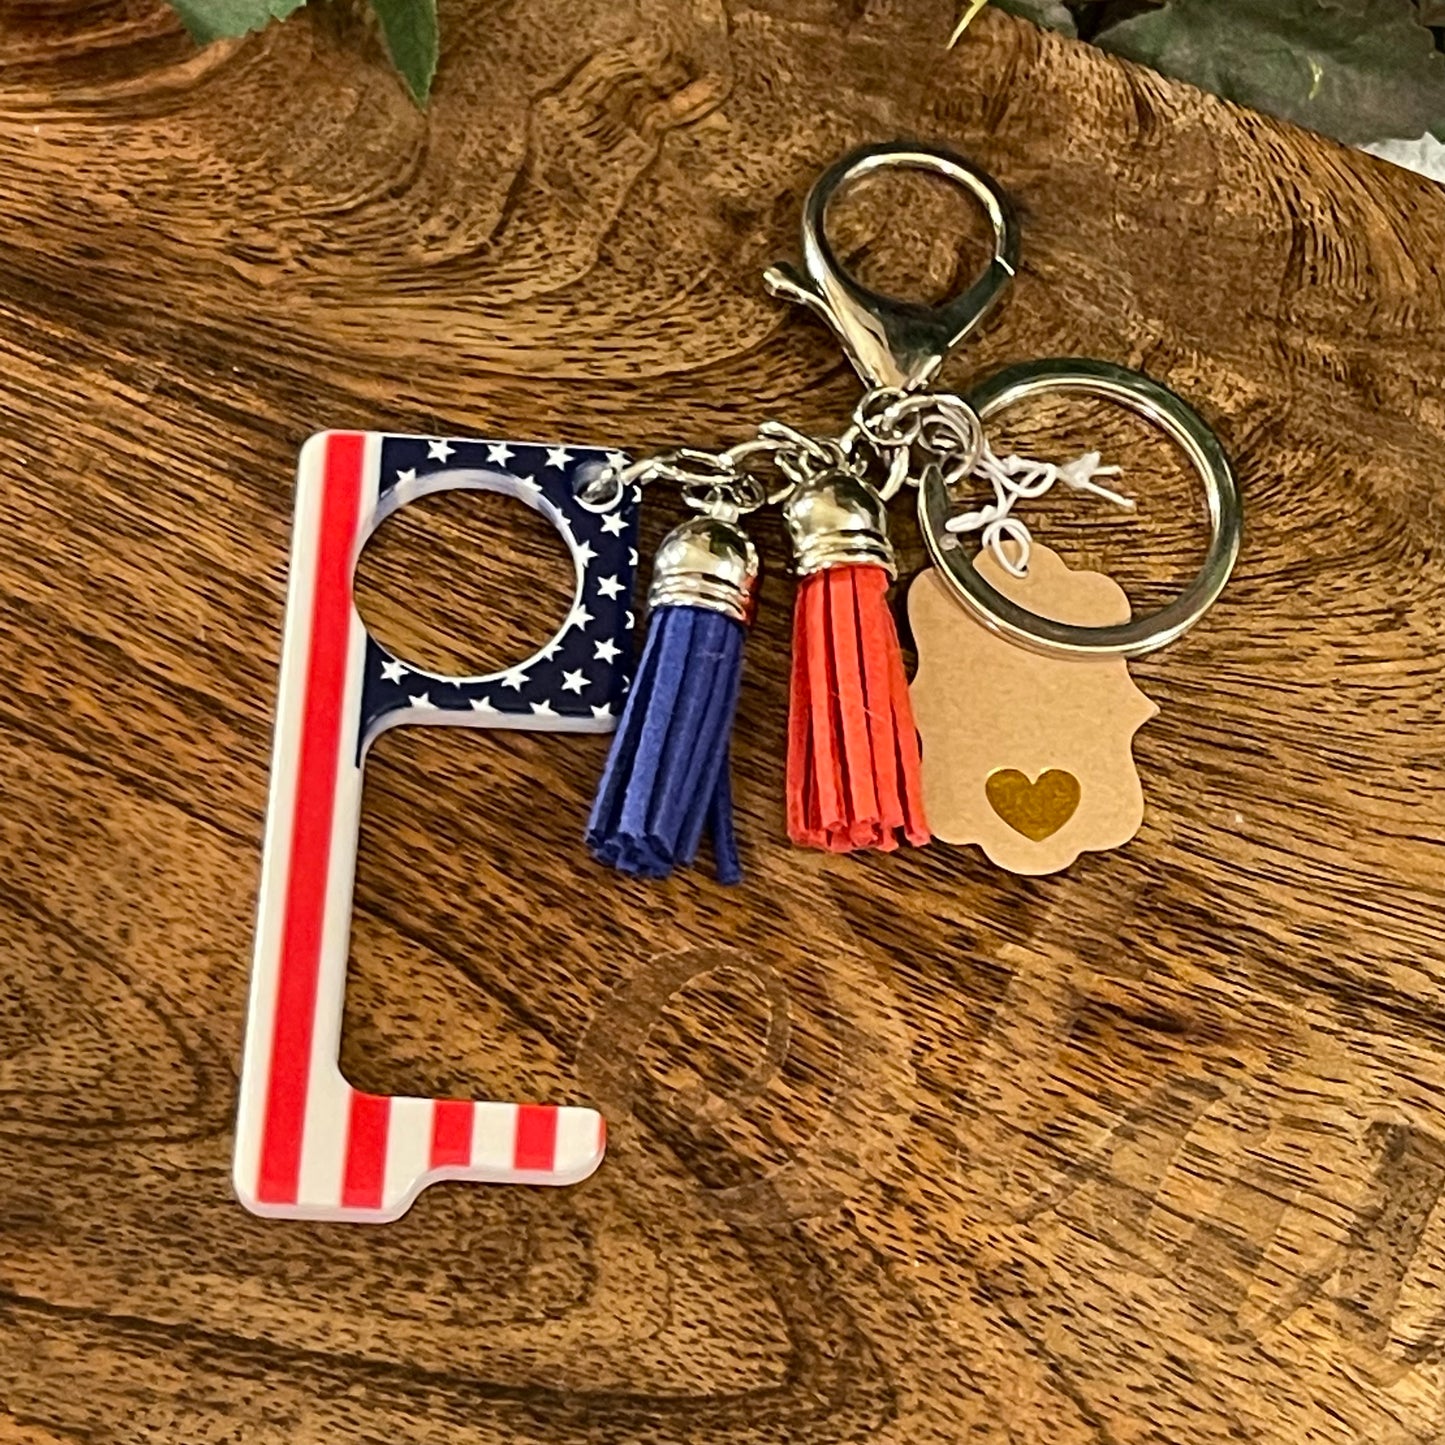 USA No Touch Tool with Keychain